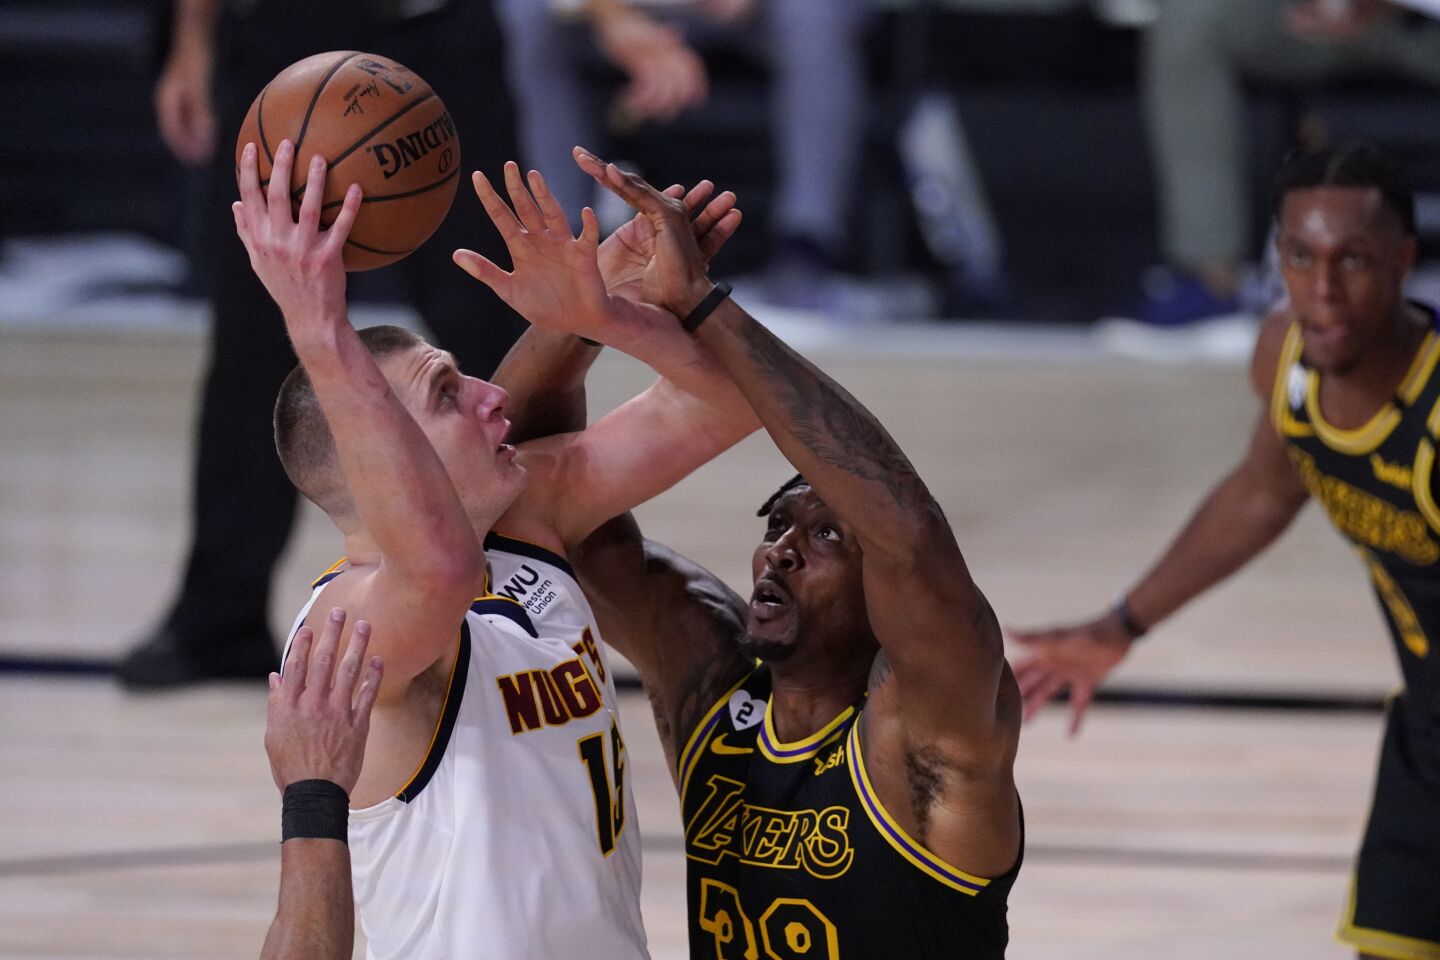 Nuggets center Nikola Jokic attempts a shot over Lakers center Dwight Howard.